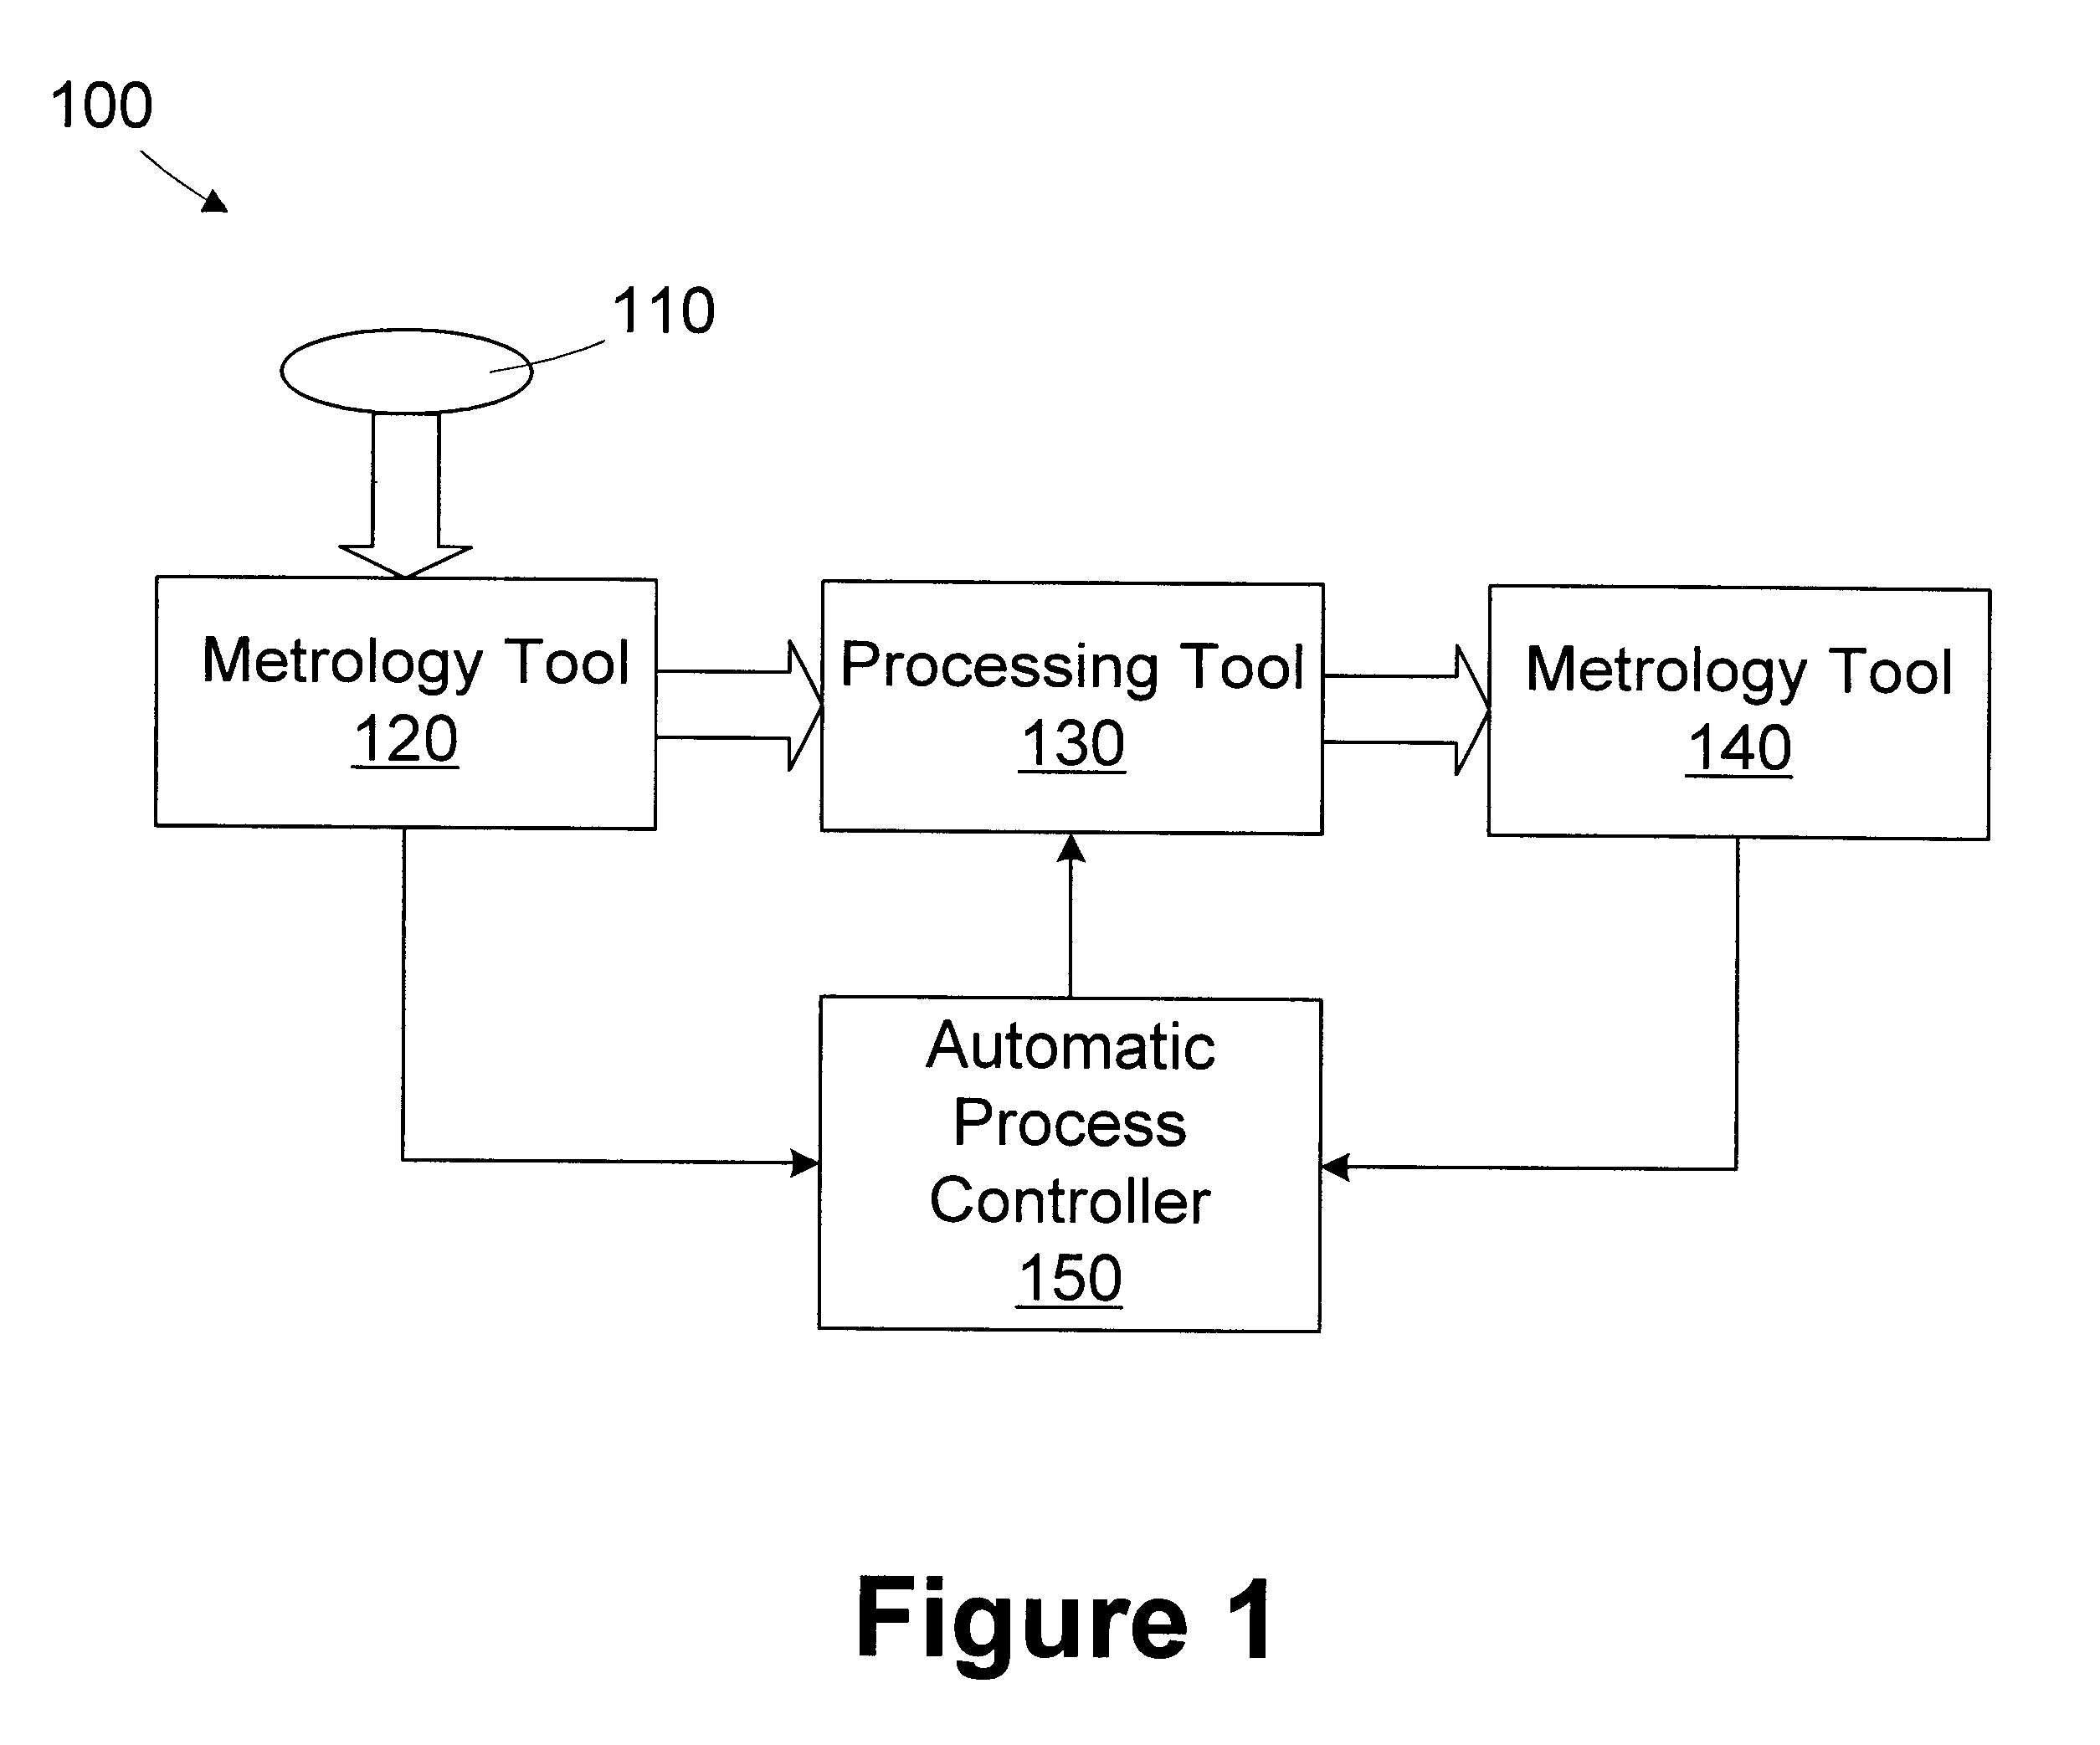 Method and apparatus for monitoring consumable performance